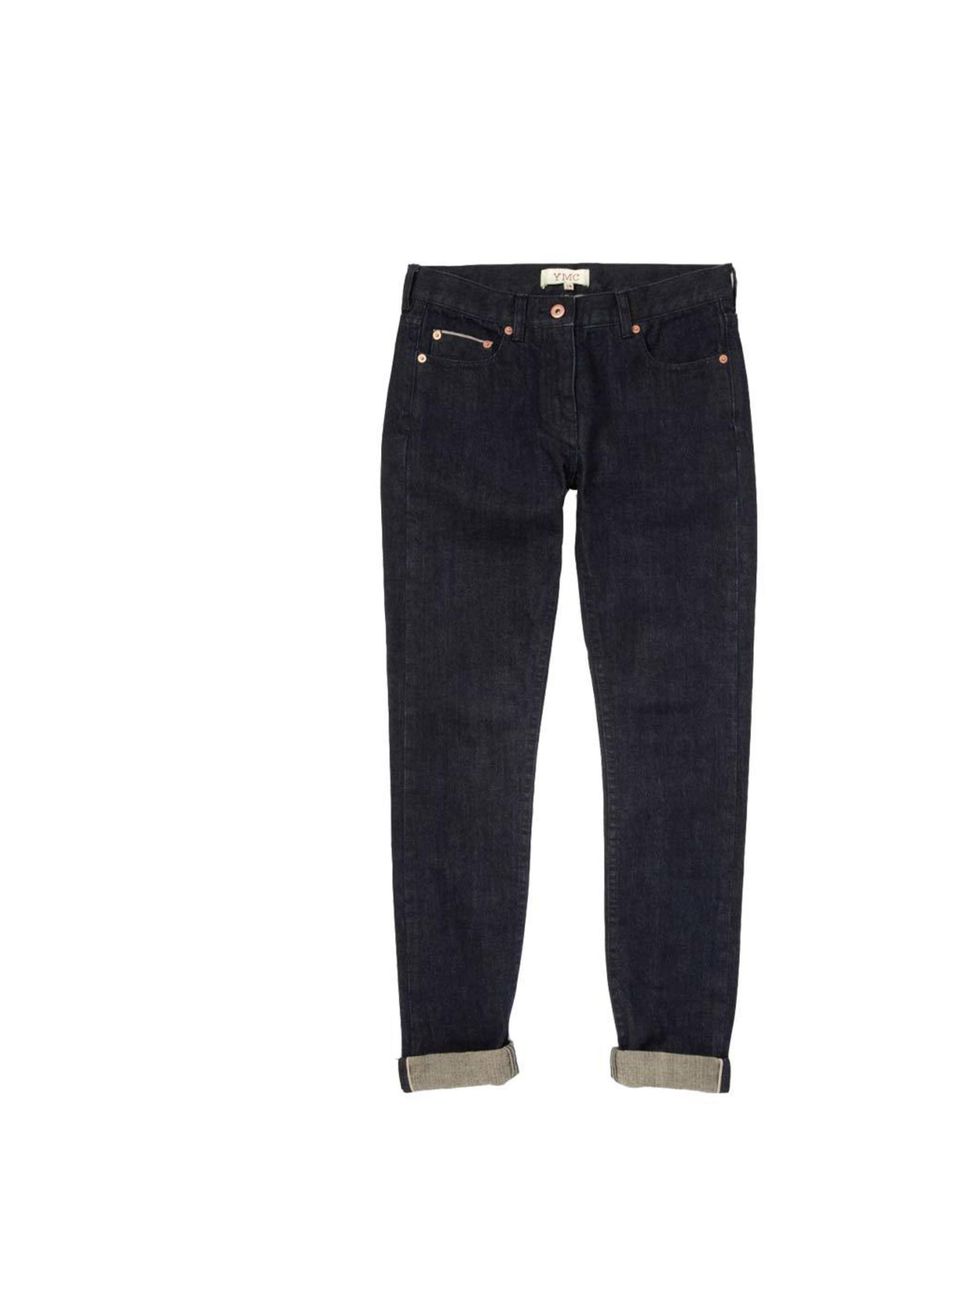 <p>A classic pair of blue selvedge jeans should be in everyone's wardrobe - this pair is on Creative Director Suzanne Sykes' shopping list.</p><p><a href="http://www.youmustcreate.com/products/aw13-ymc-skirtsandtrousers/selvedge-jean-3/">YMC</a> jeans, £1